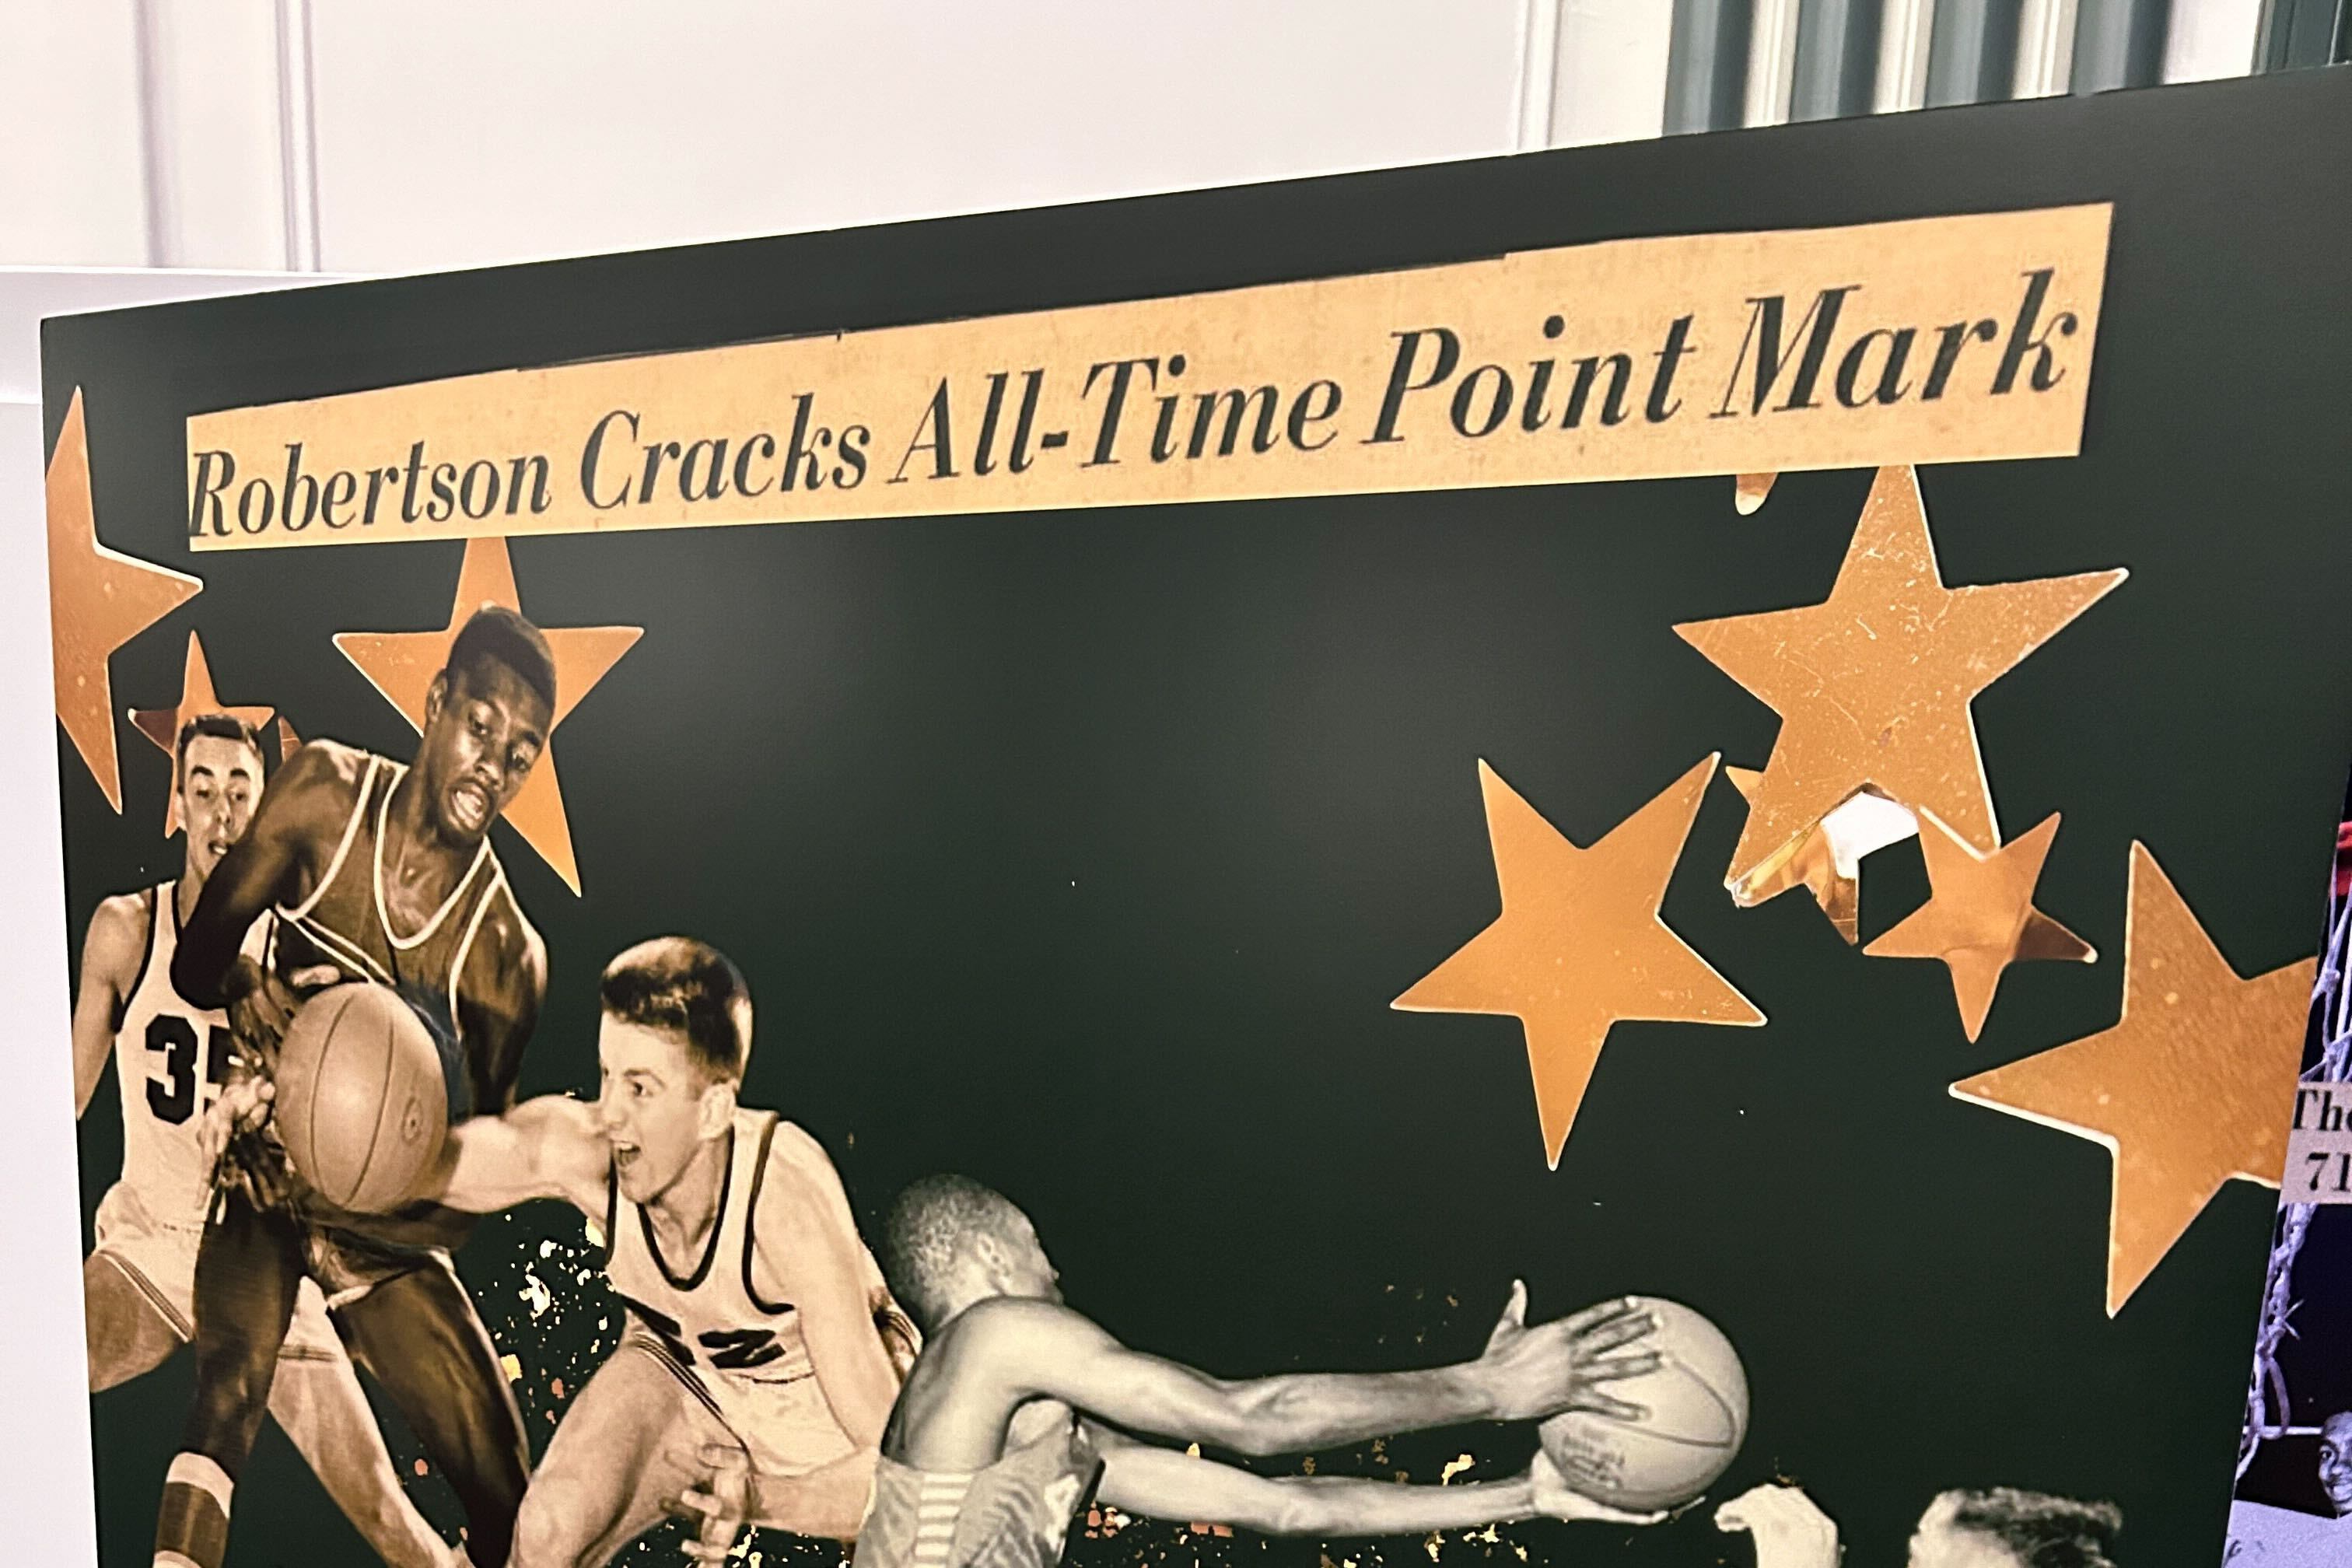 A collage of black and white photos of basketball players with gold stars and newspaper print at the top that reads "Robertson Cracks All-Time Point Mark."